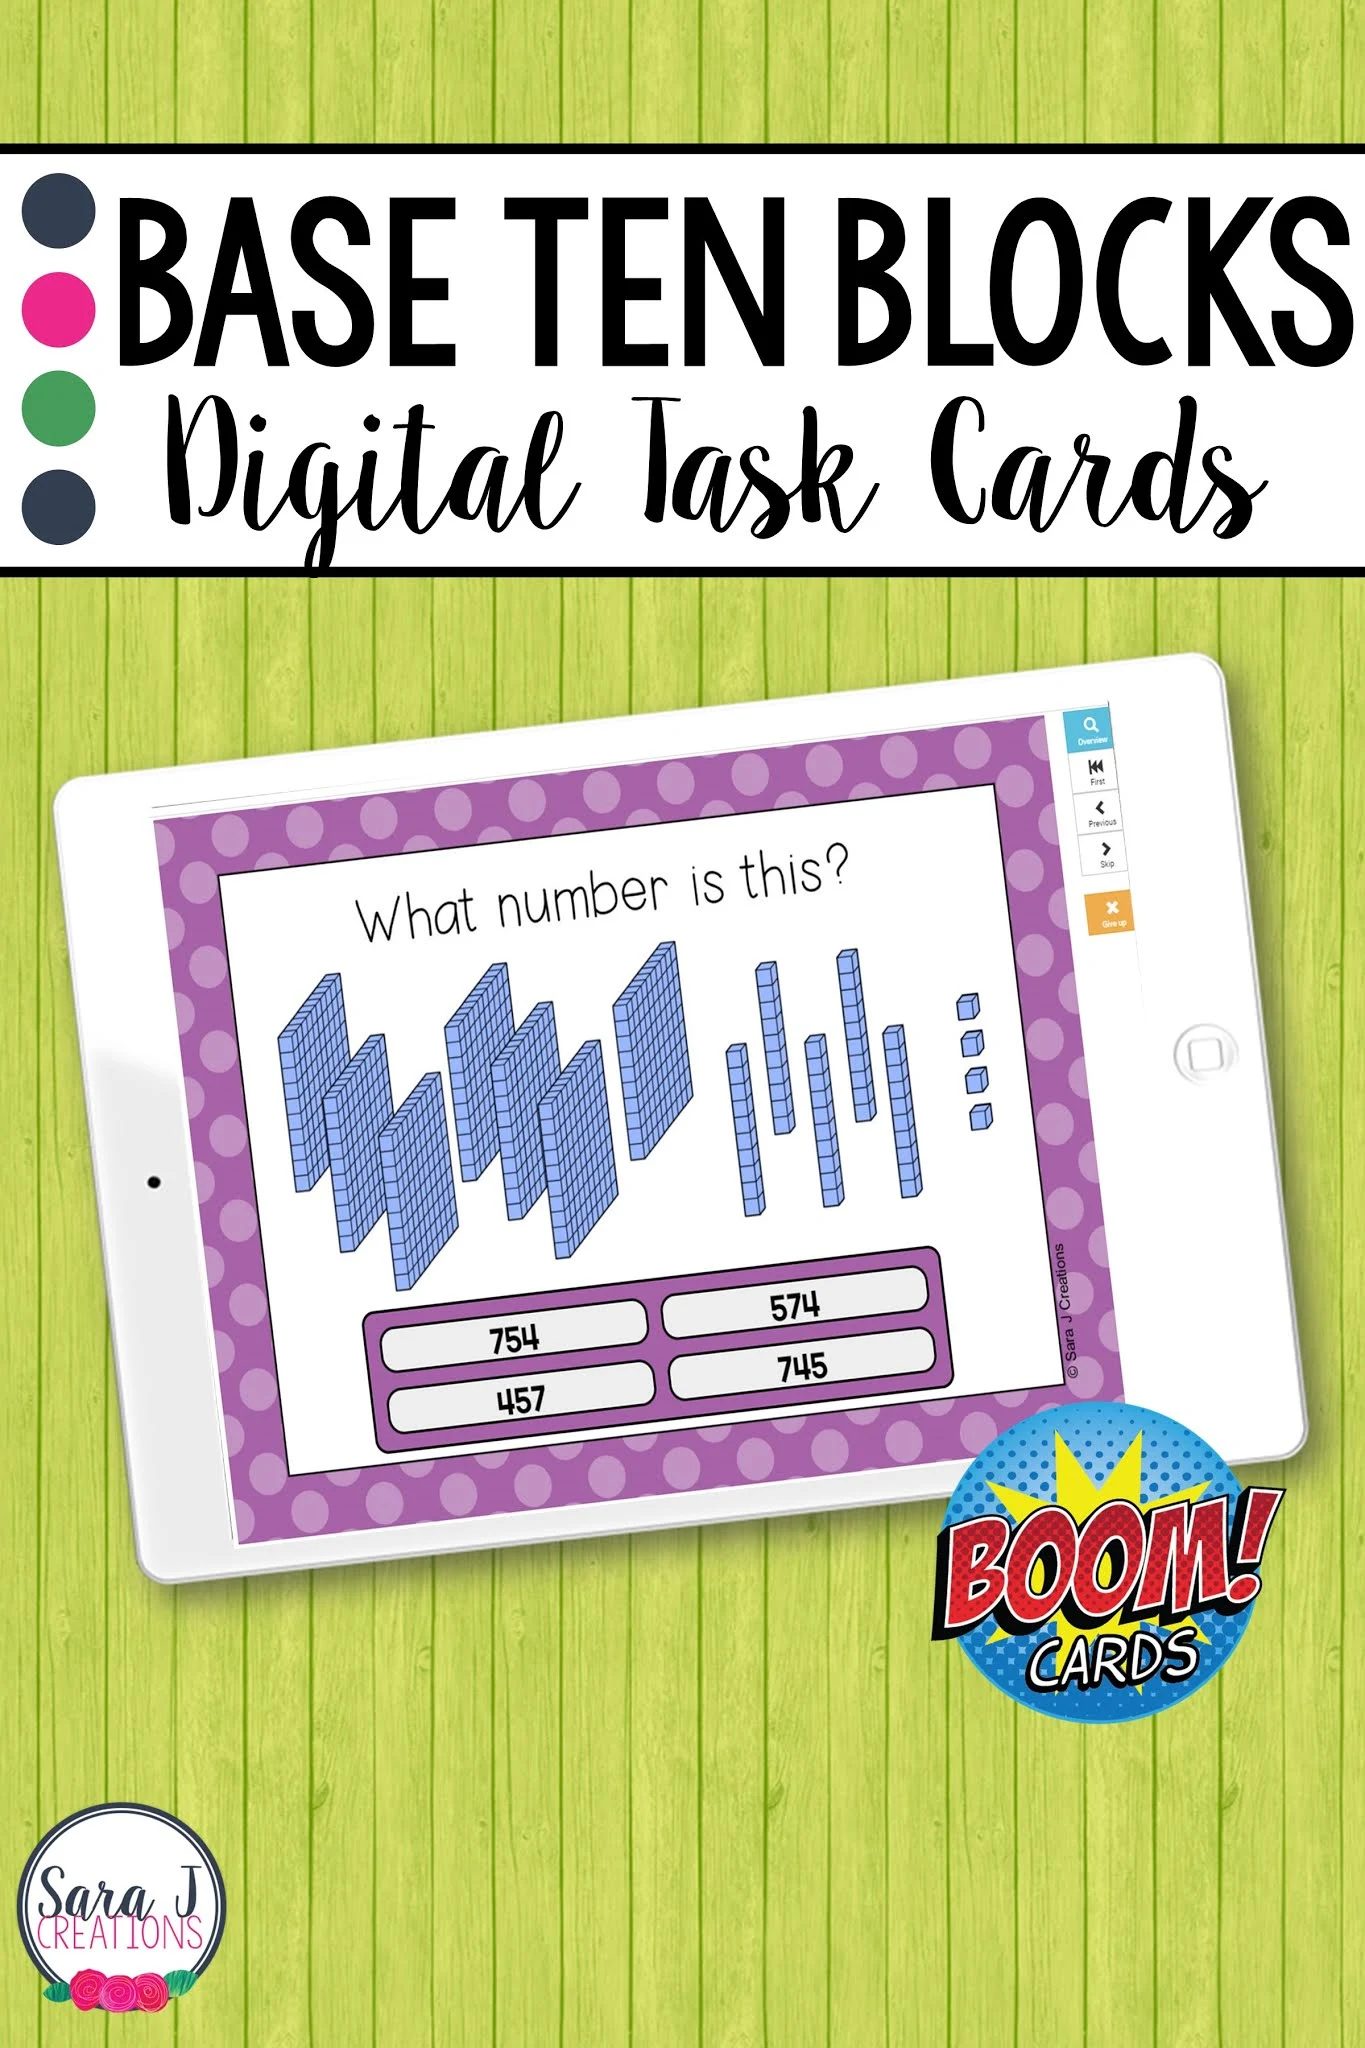 Make digital learning fun with these engaging, no prep Place Value Base Ten Blocks Boom Cards. These digital task cards are perfect for remote learning but can also be used in a traditional classroom on devices such as ipads, tables, Chromebooks, smartboards, and more. Designed for 2nd grade, these place value task cards include numbers up to 1,000.